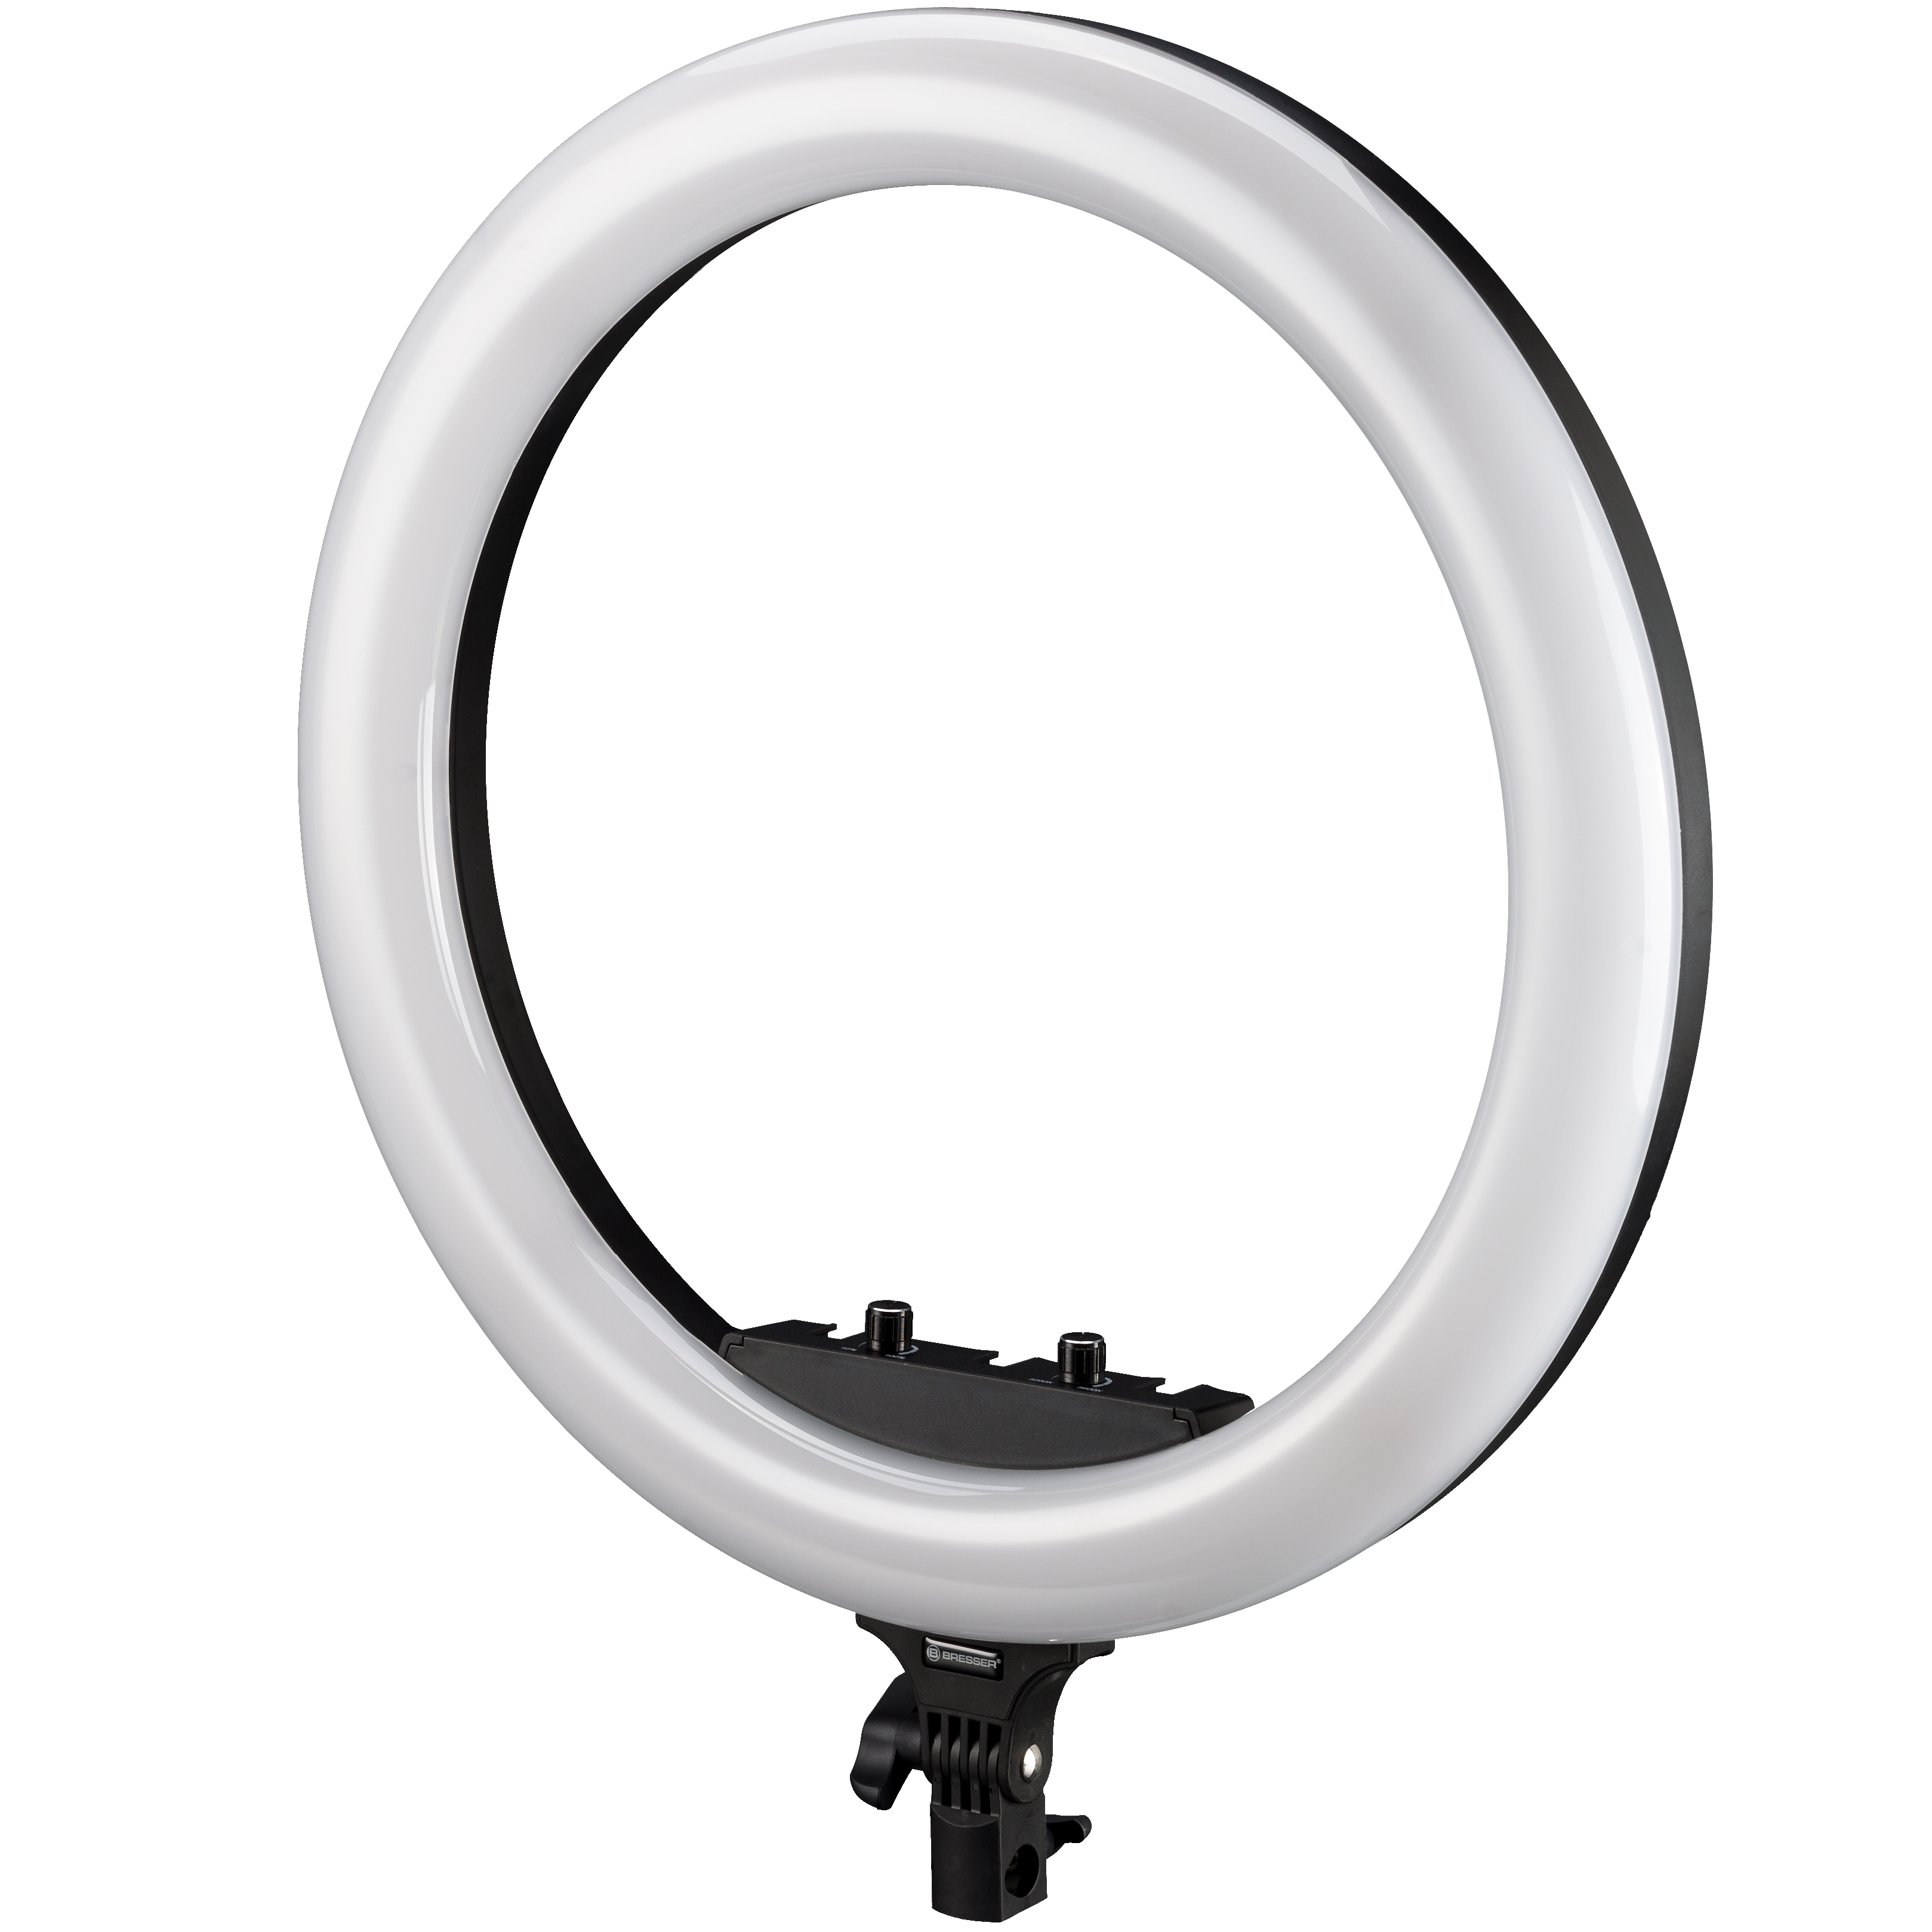 BRESSER STR-48B Bi-Color LED Ring Lamp 48W with Dimmer and Support for Camera and Smartphone